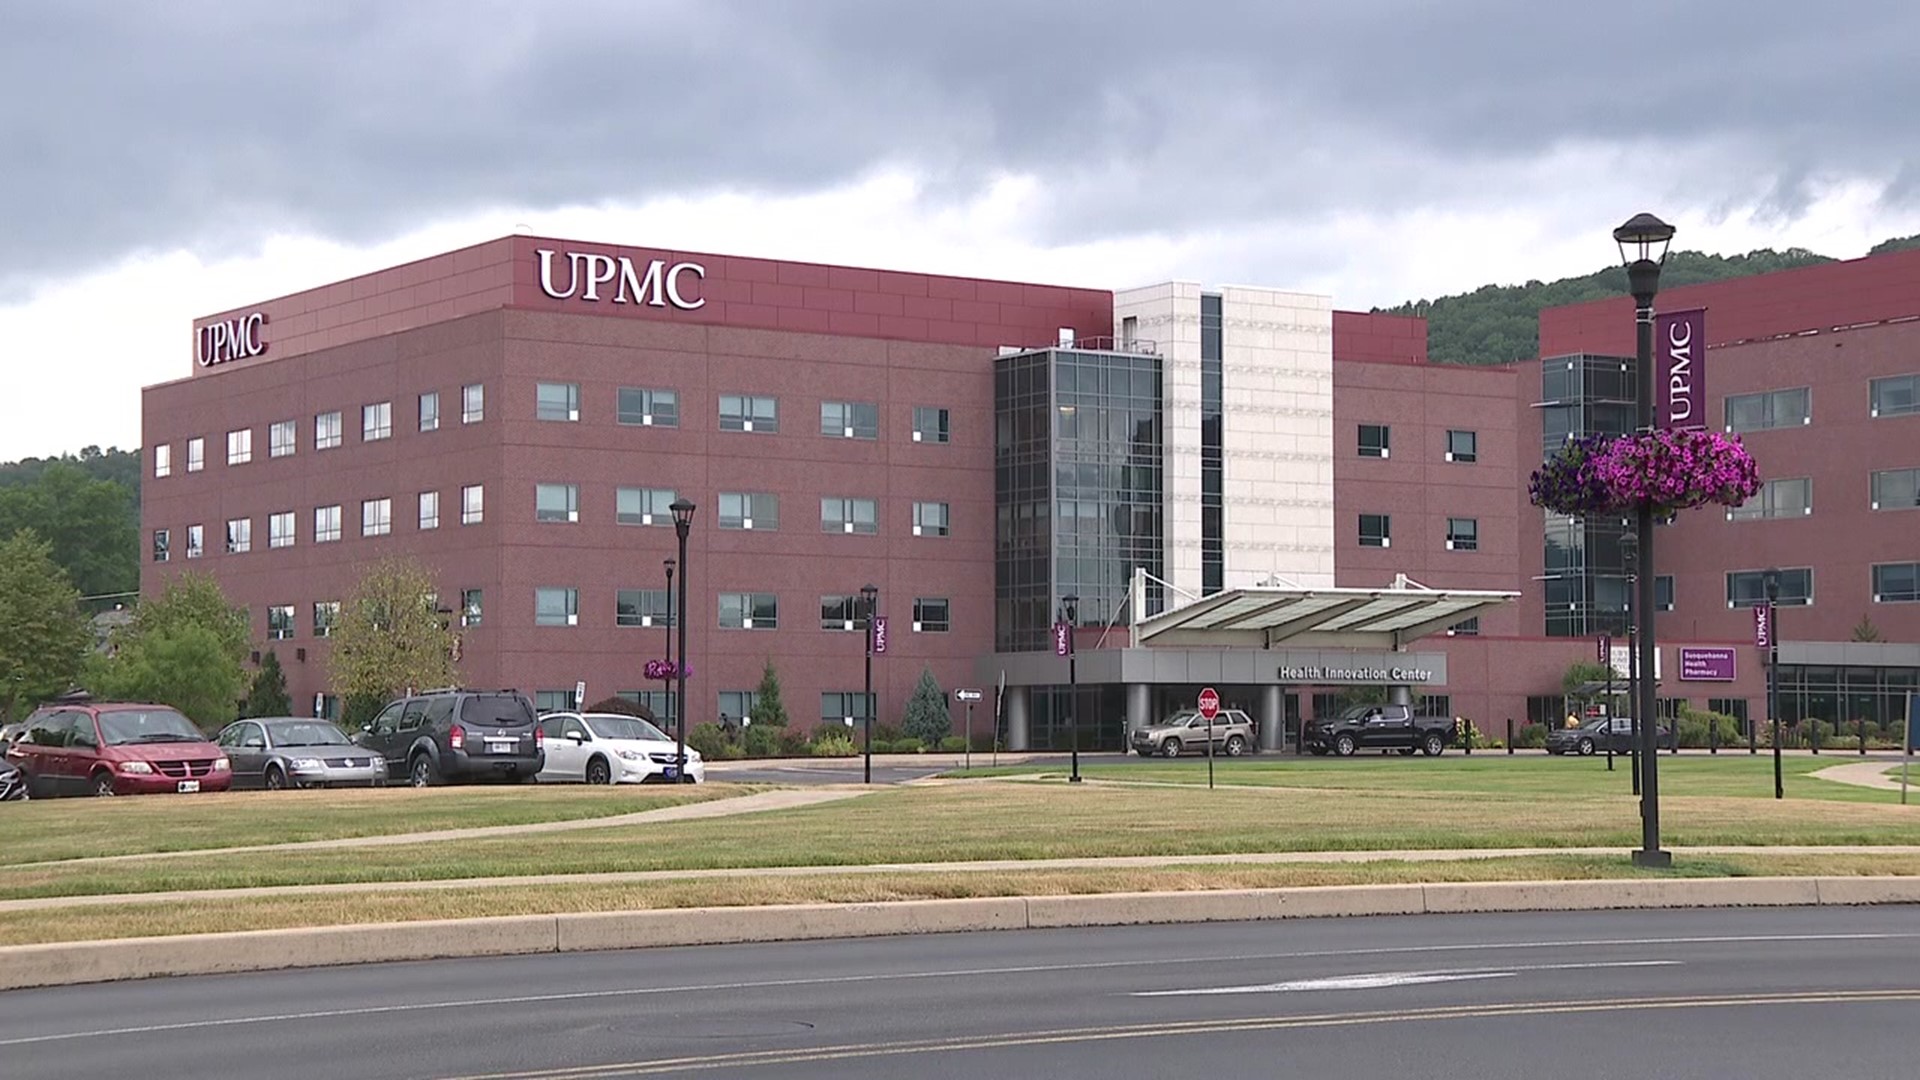 Newswatch 16's Chris Keating spoke with a health expert at UPMC about the increase in cases.